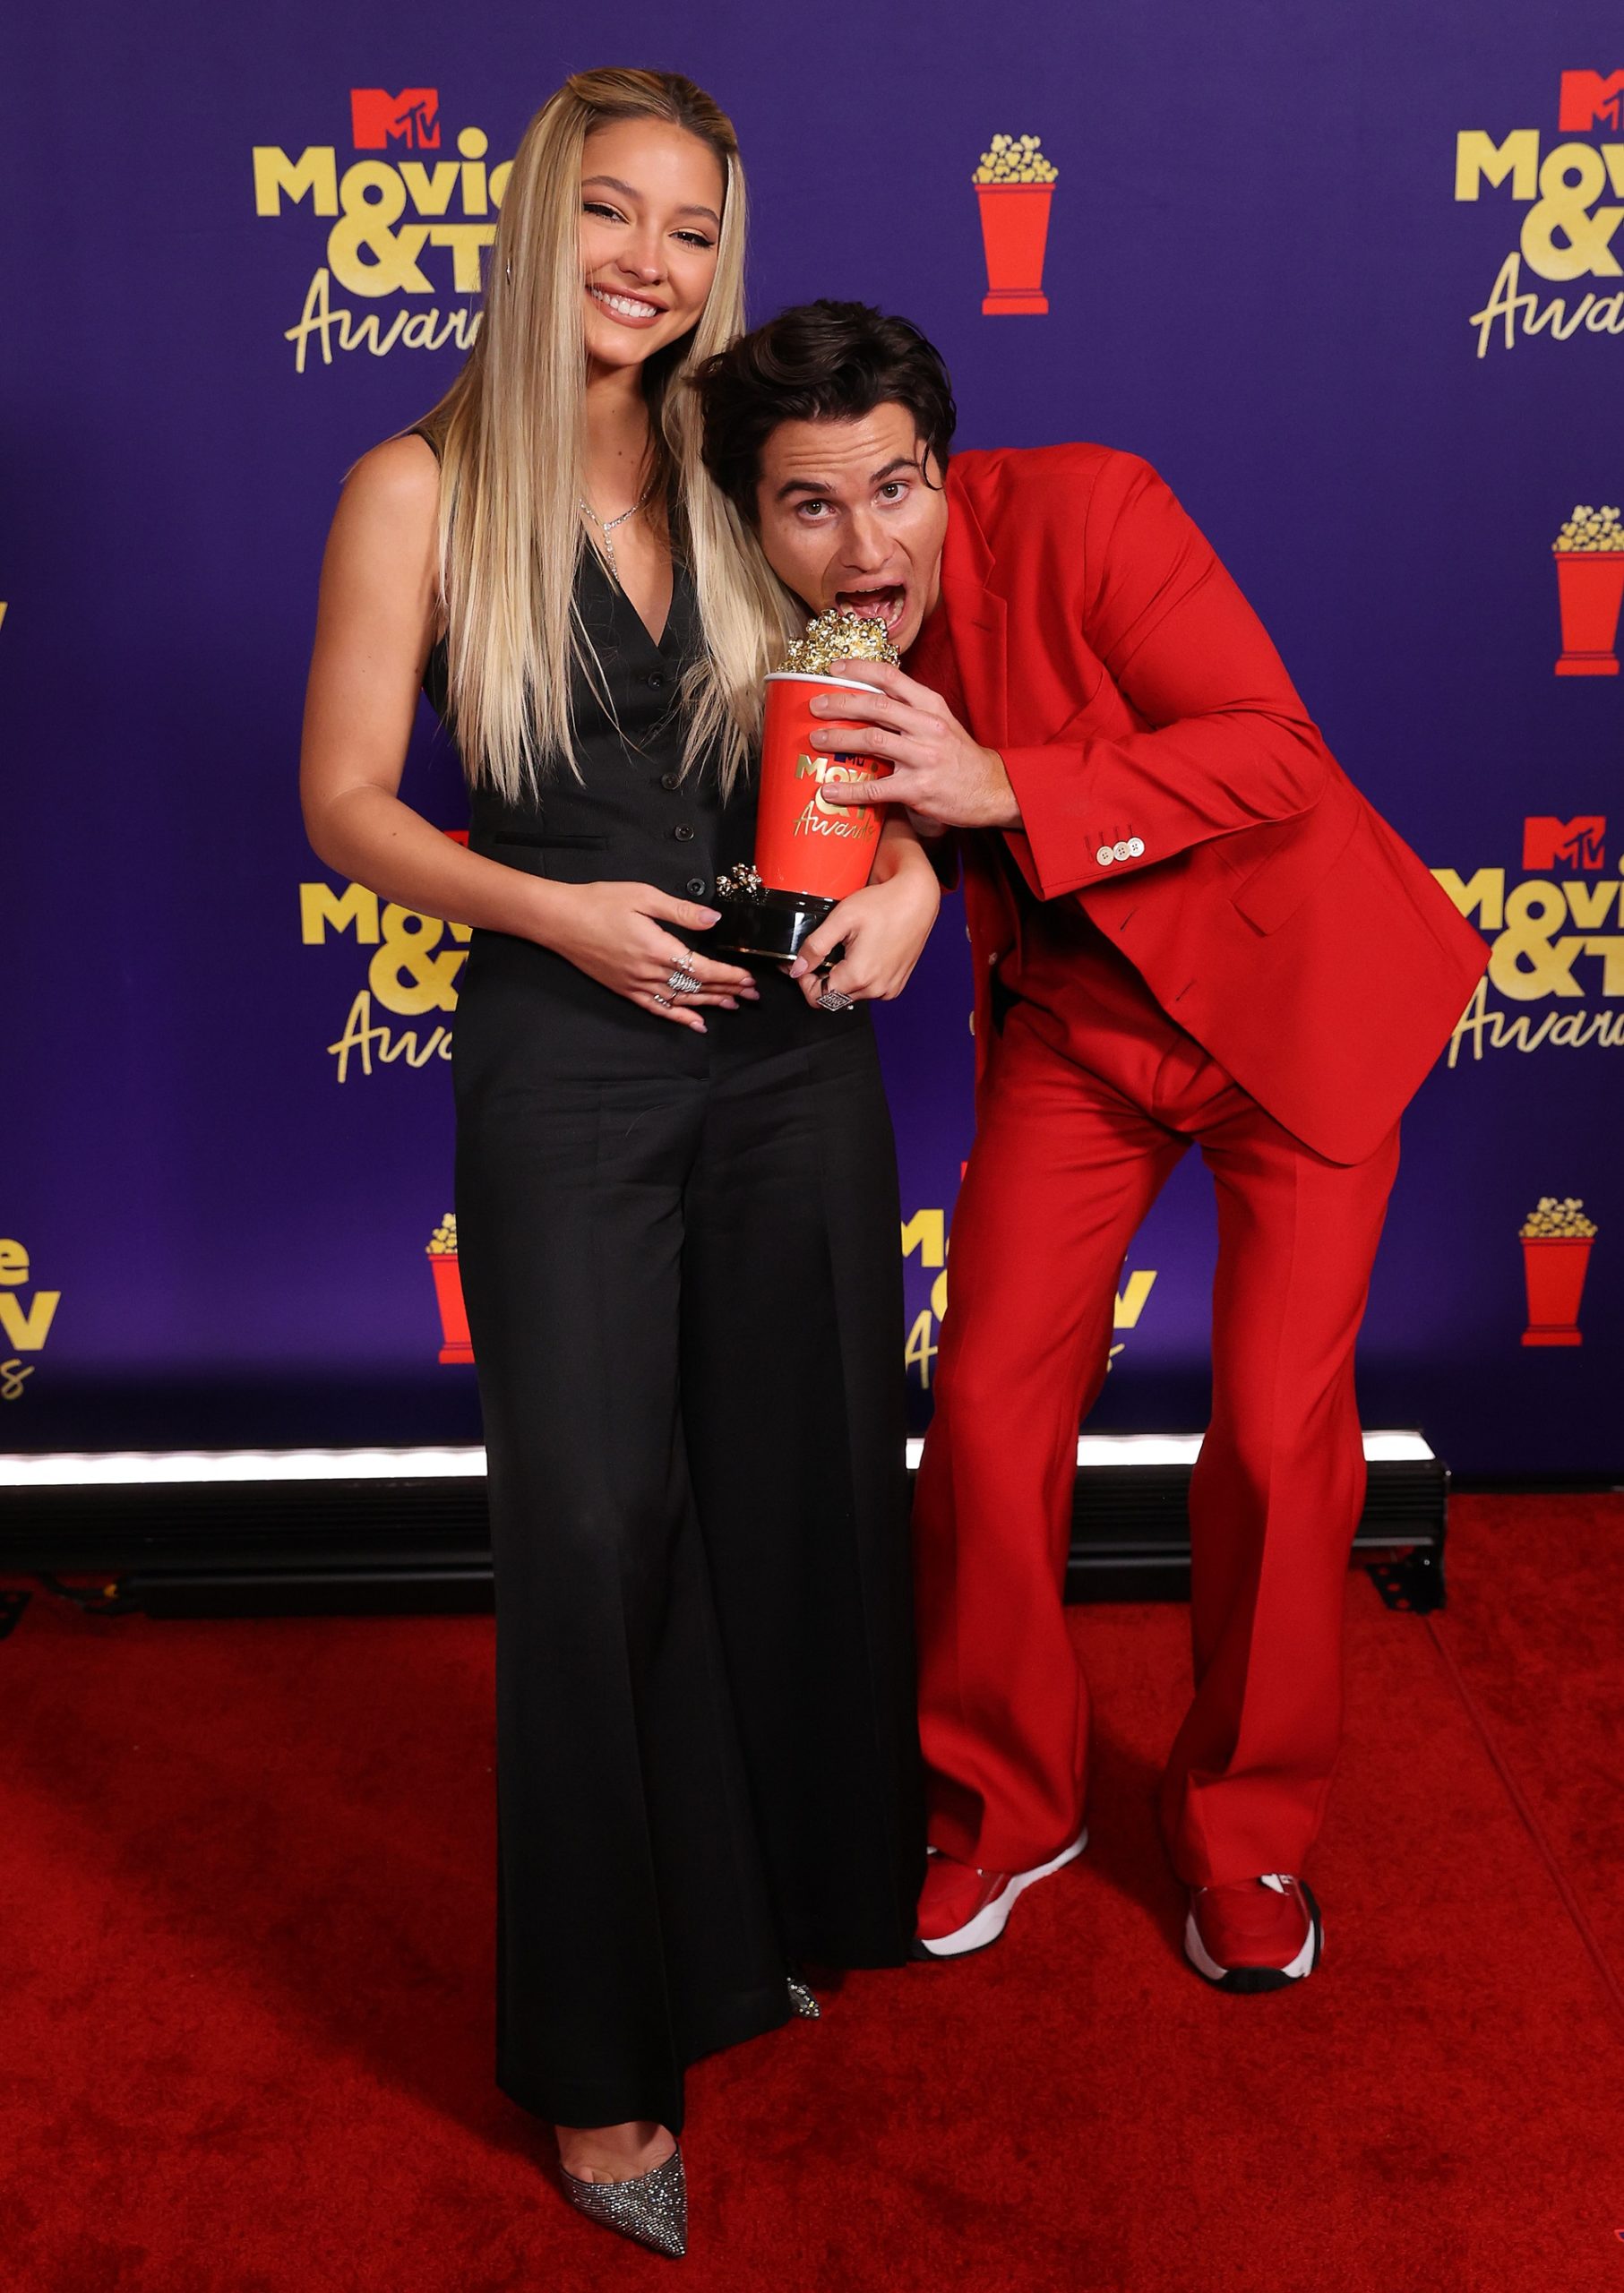 MTV Movie and TV Awards - Madelyn Cline and Chase Stokes